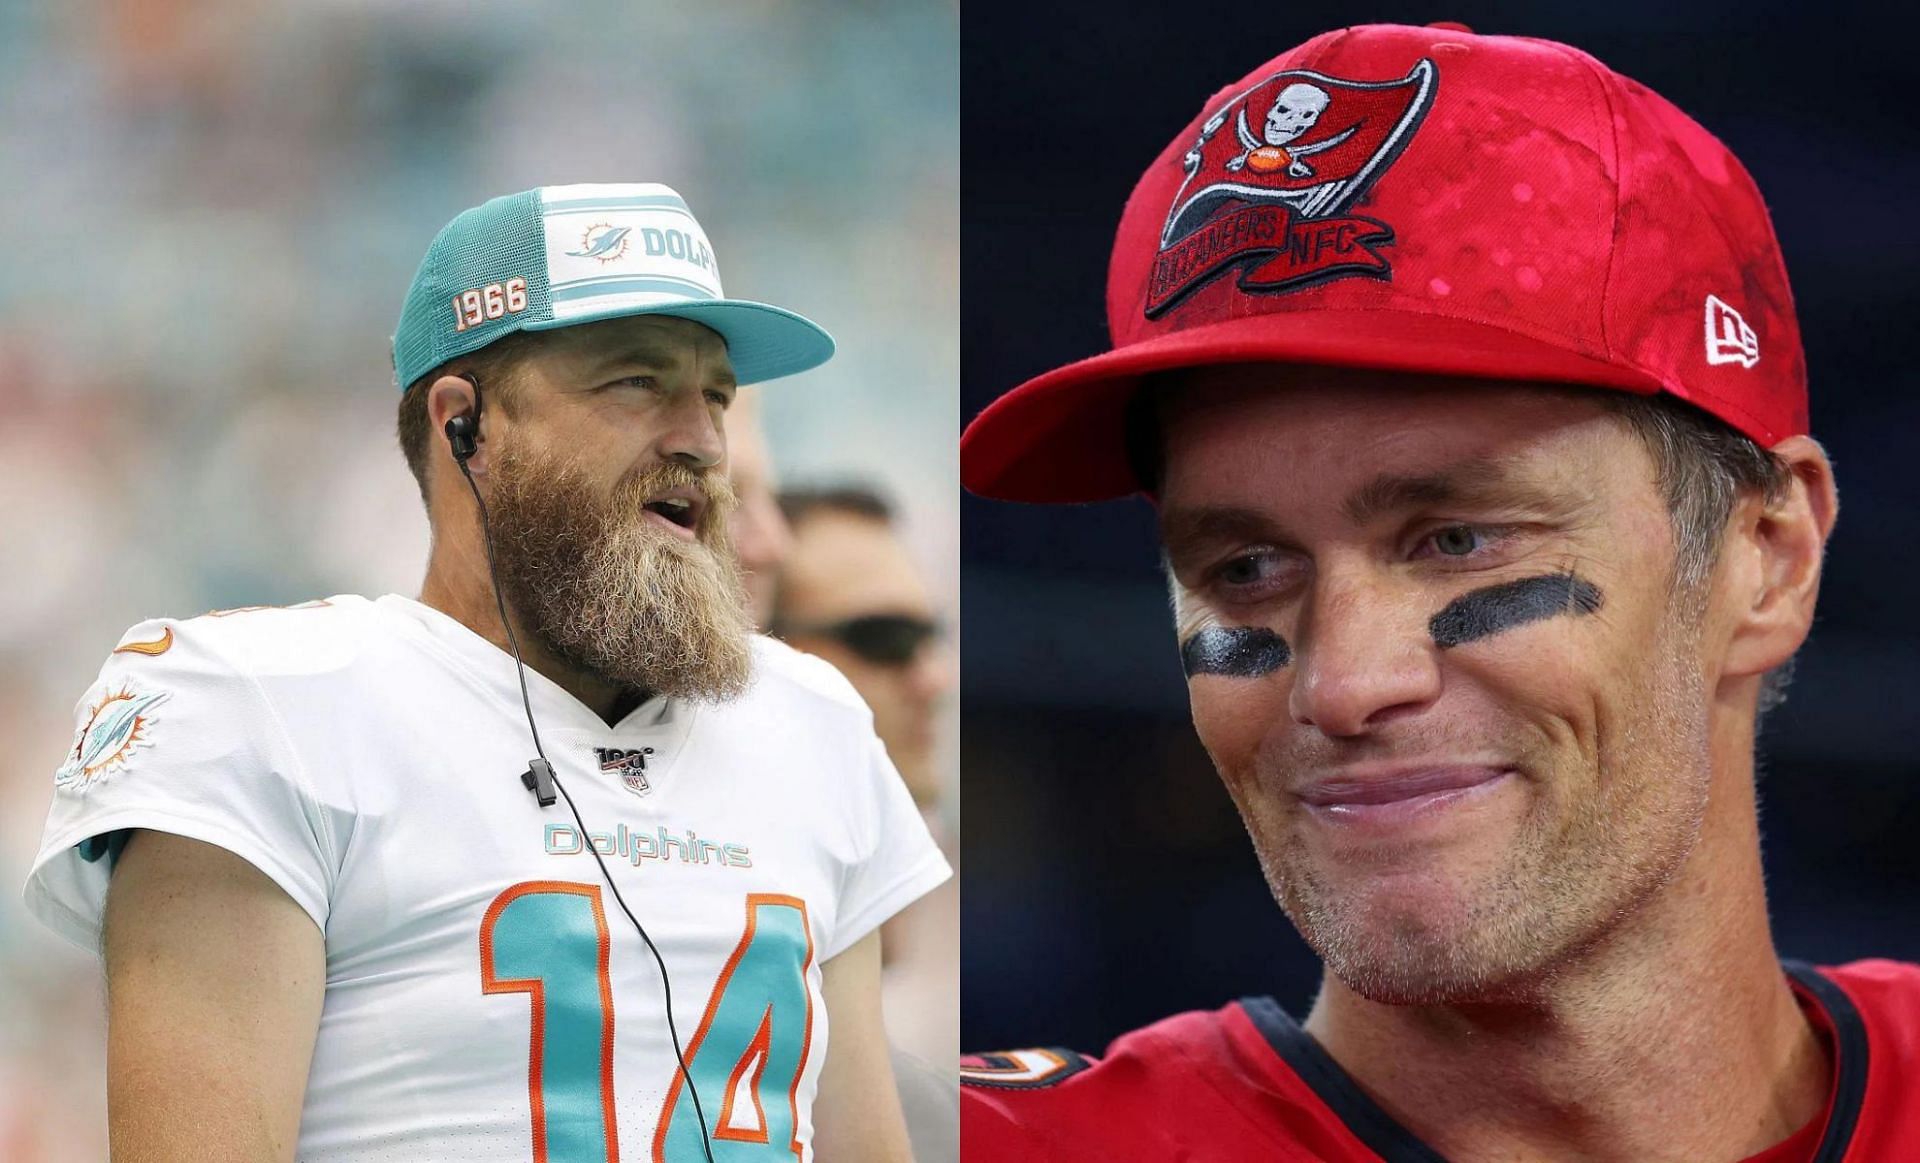 The legendary quarterback denies that he was referring to Fitzpatrick